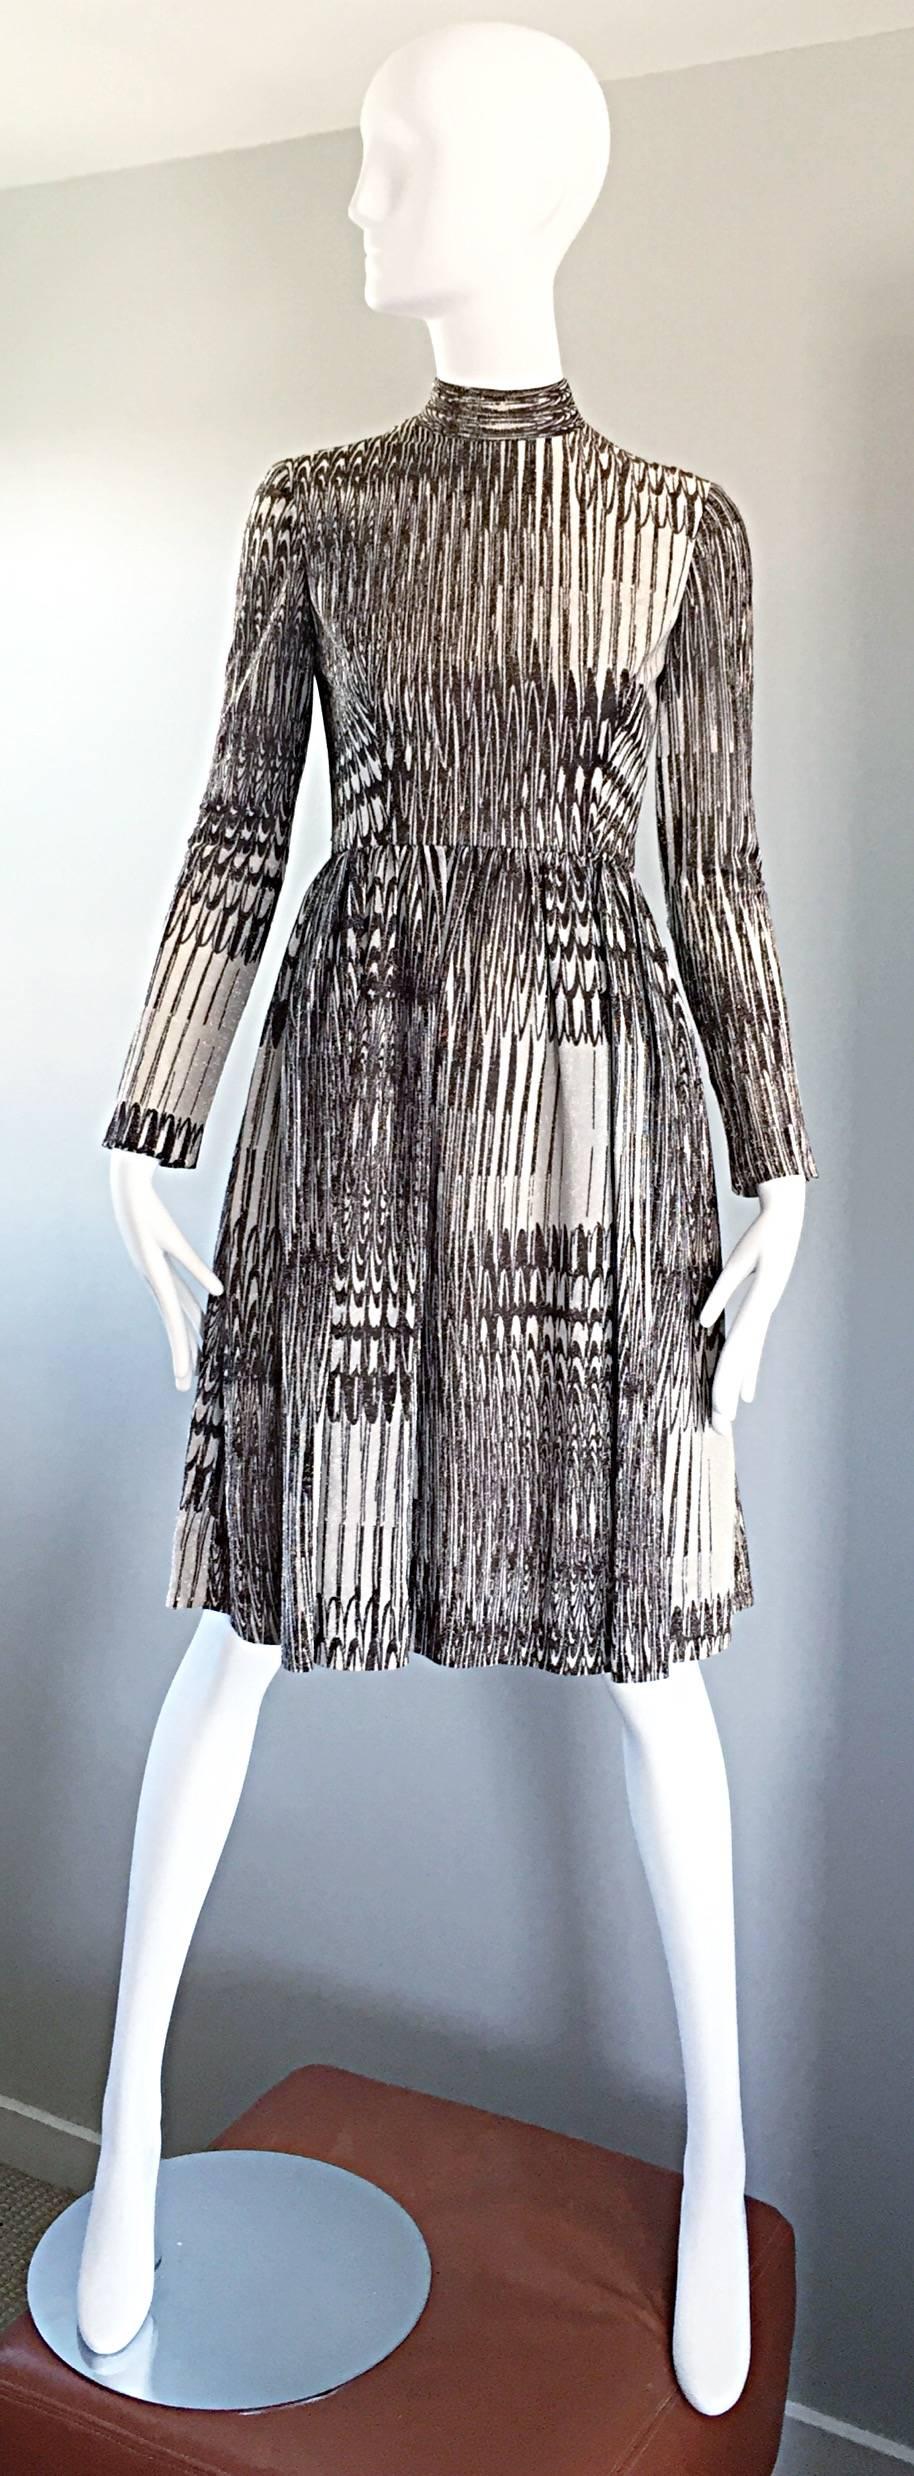 Chic vintage 1960s MOLLIE PARNIS brown, gold, and white metallic lurex dress! Fabulous mod abstract print, with an excellent tailored fit. Slim long sleeves and a mock neckline. Flirty A-Line skirt. Full metal zipper up the back with hook-and-eye